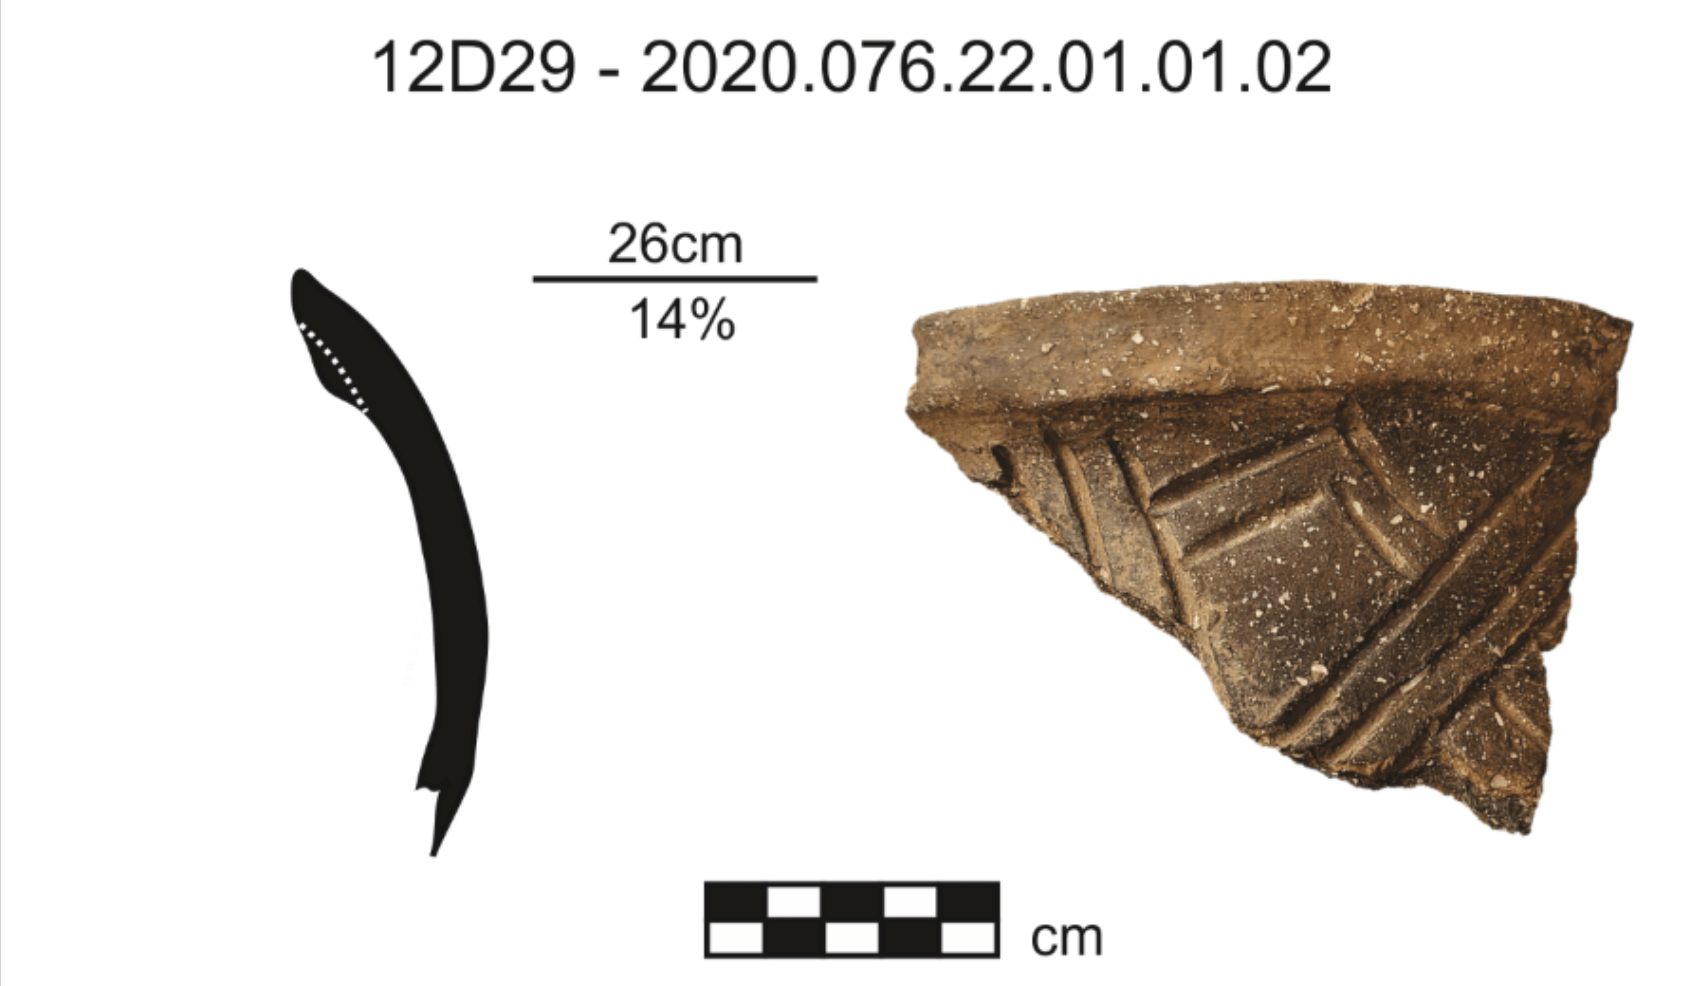 Large fragment of a pottery jar, likely used to cook or serve food like hominy